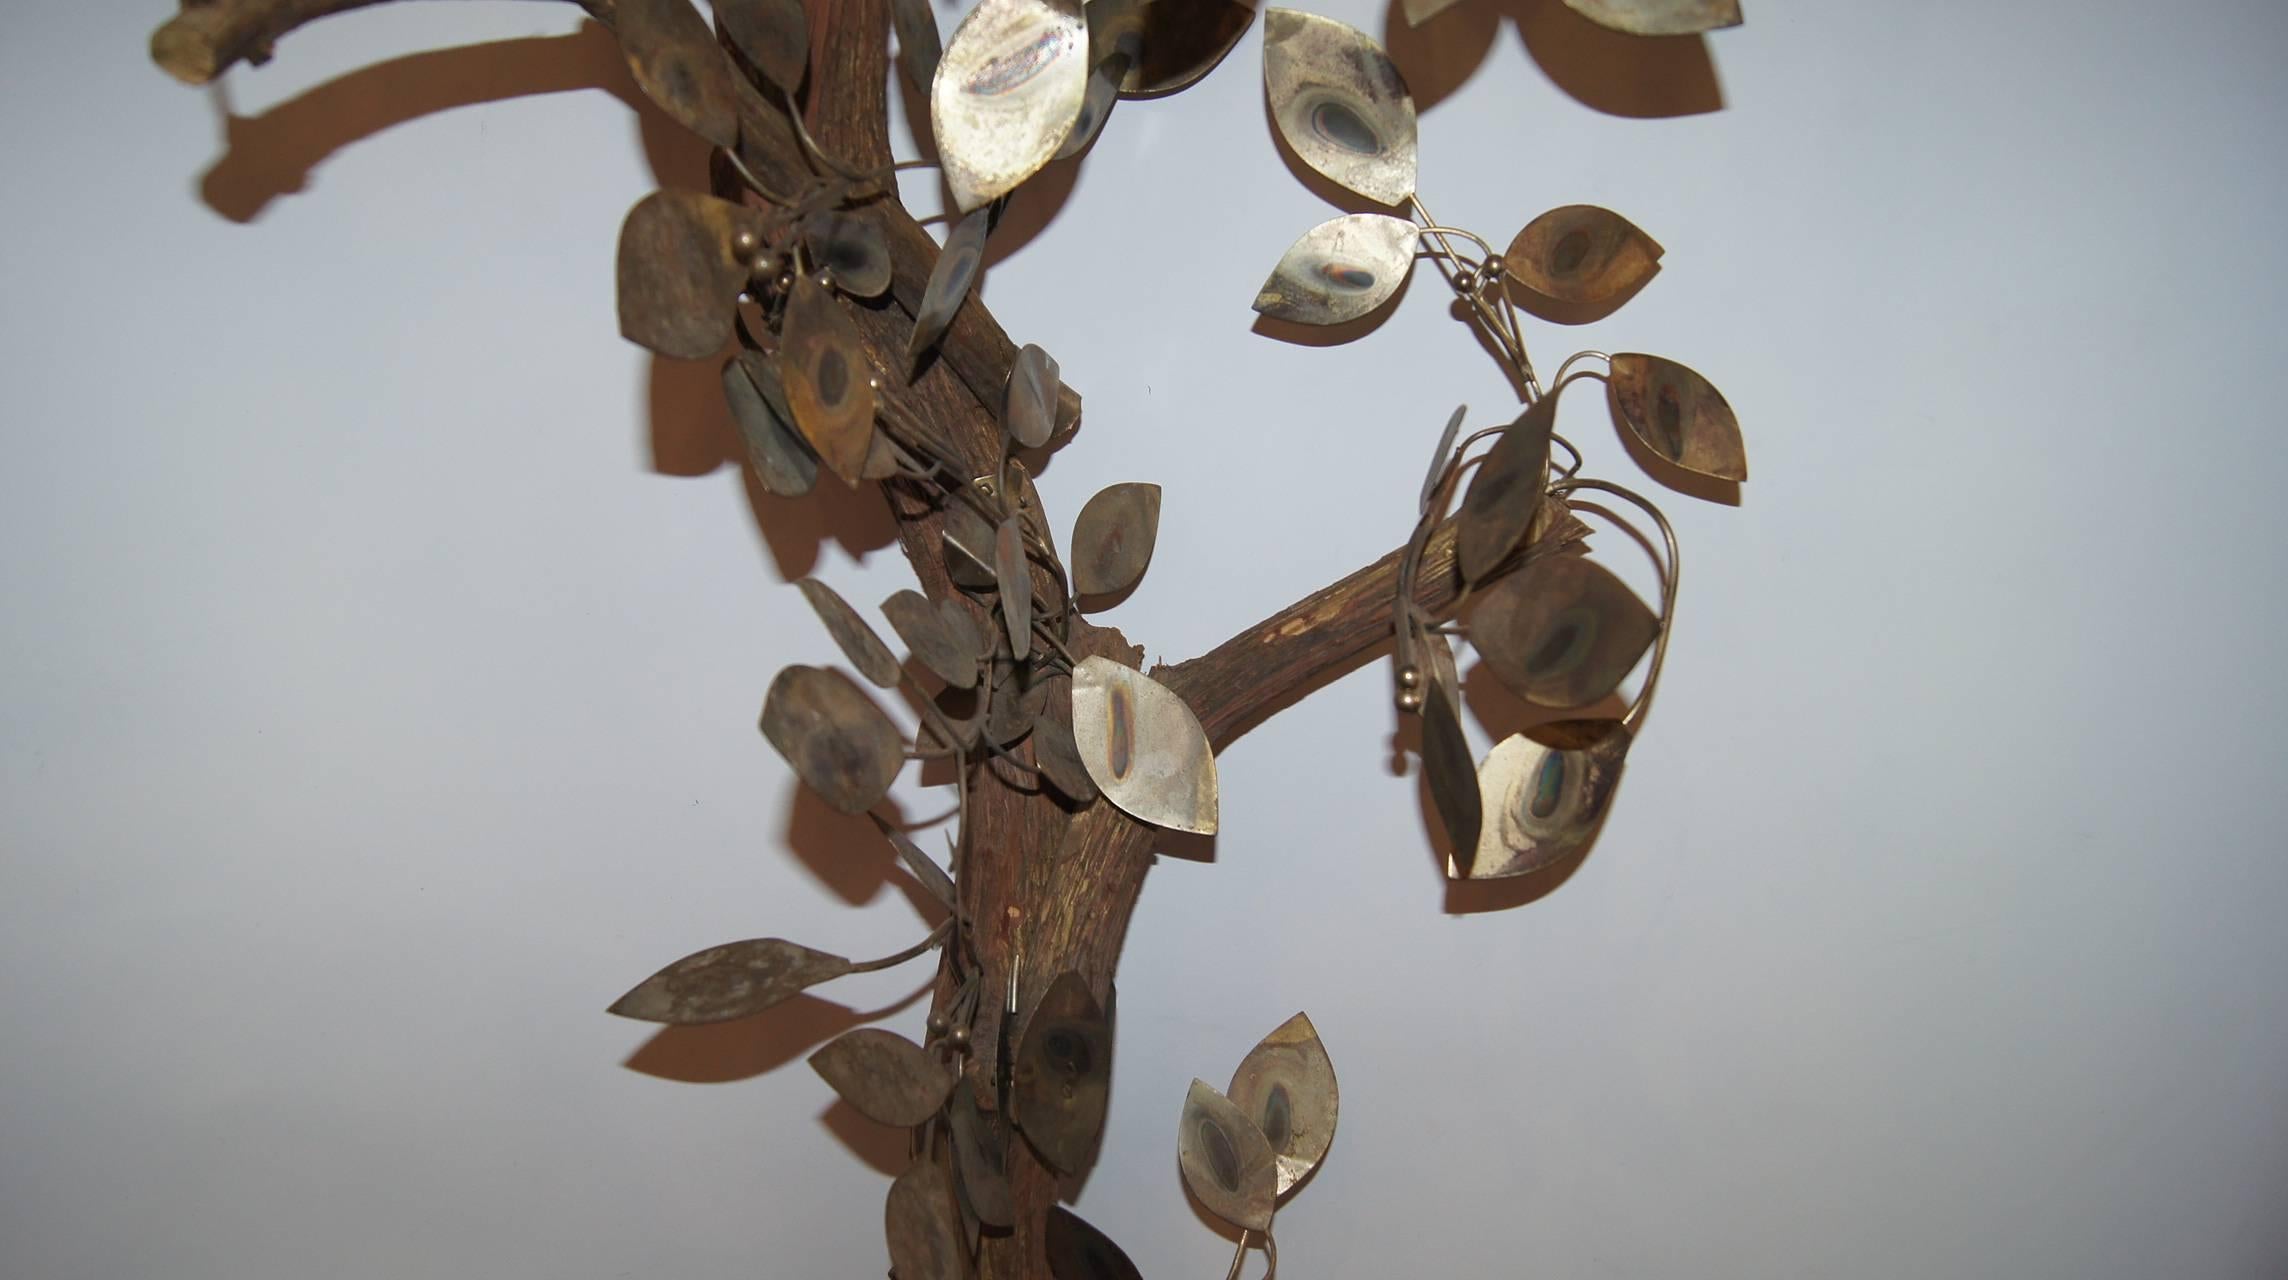 A circa 1960's Italian hammered and patinated metal tree.

Measurements:
Height: 74